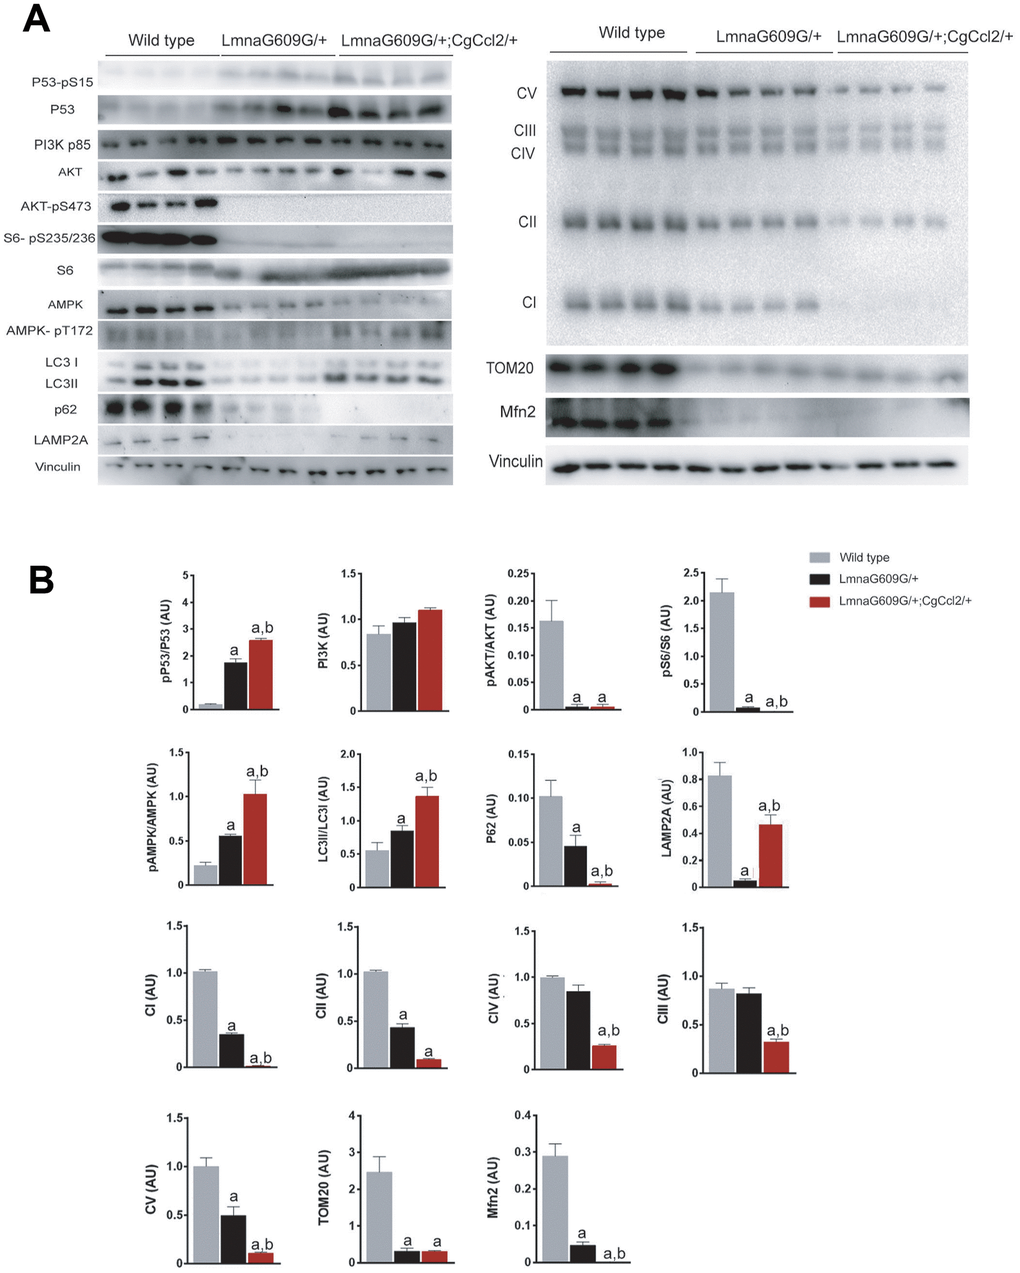 Ccl2 overexpression significantly altered the expression of the complexes related to oxidative phosphorylation and the relevant metabolic signaling pathways in the quadriceps muscle. Ccl2 overexpression exacerbated the metabolic reduction, mainly in mitochondria, (A) of the mice with accelerated aging and altered (B) the functioning of AMPK-mTOR-driven pathways. LMNAG609G/+;CGCCL2+/- and LMNAG609G/+ denote progeroid mice overexpressing and not overexpressing Ccl2, respectively. Values are shown as the means ± SEM; a pb p